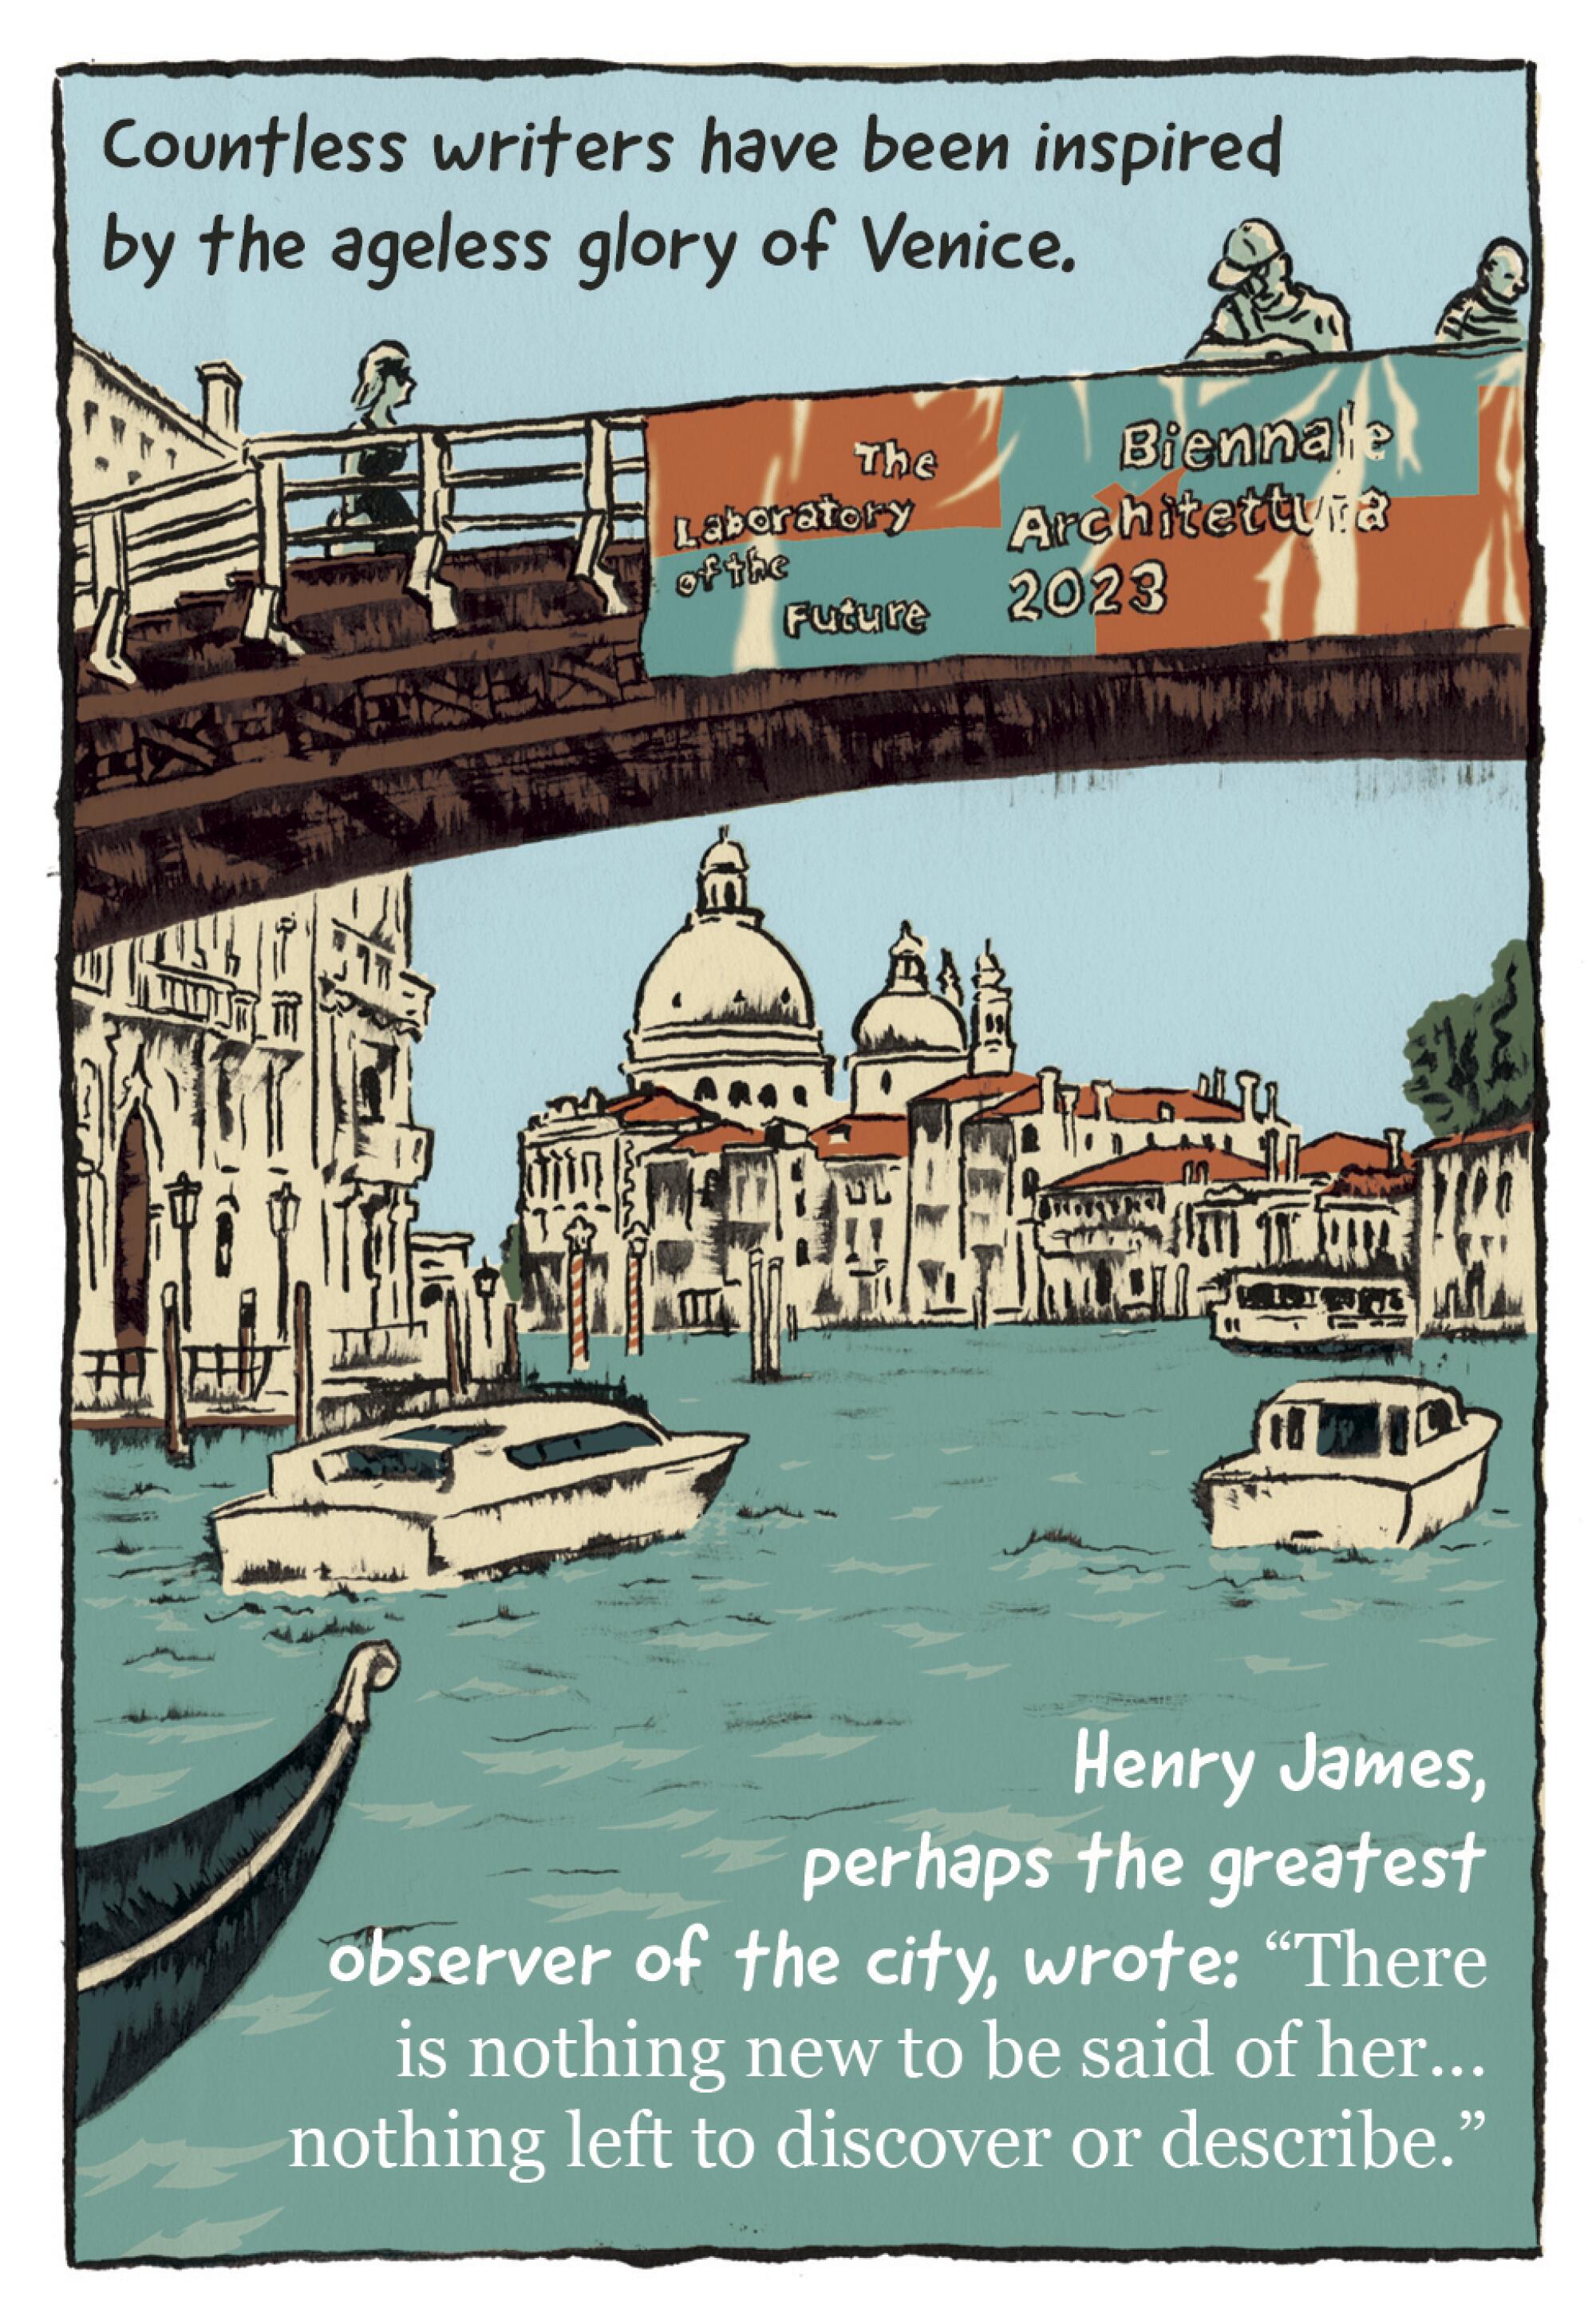 Countless writers have been inspired by the ageless glory of Venice.